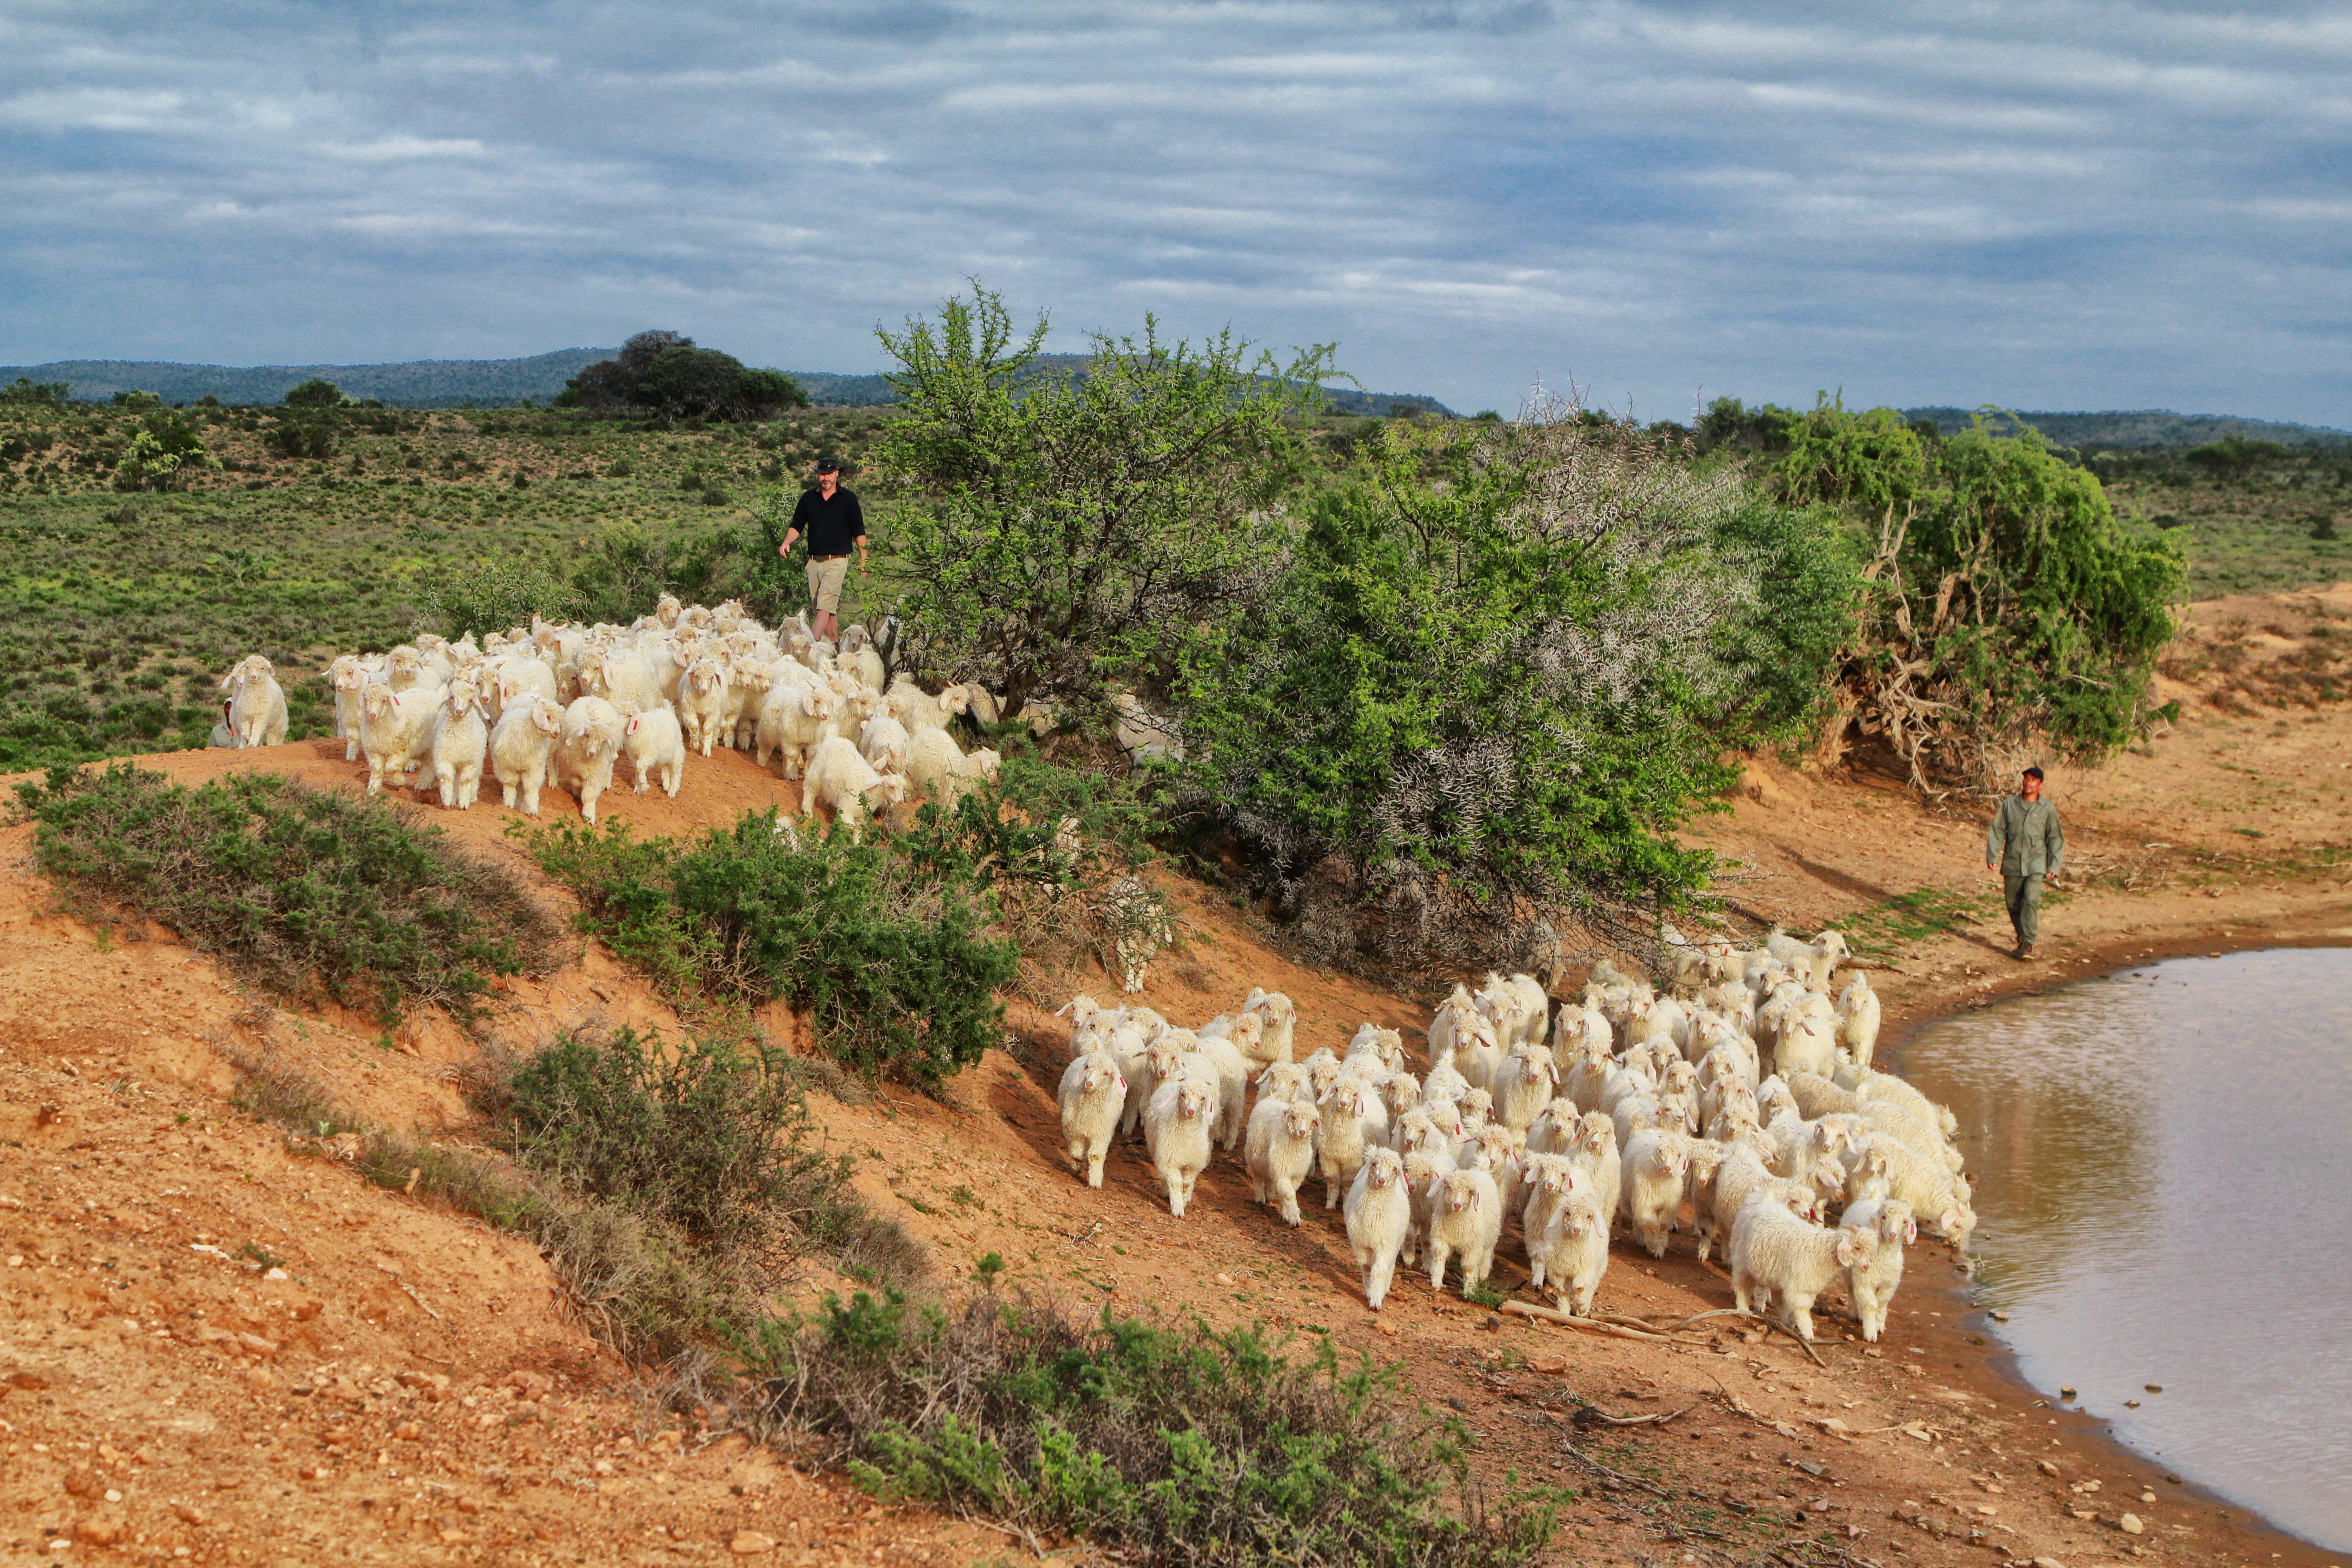 Herding the Martyrsford goats shortly after drought-relieving (no-one here says ‘drought-breaking’) rains. Image: Chris Marais